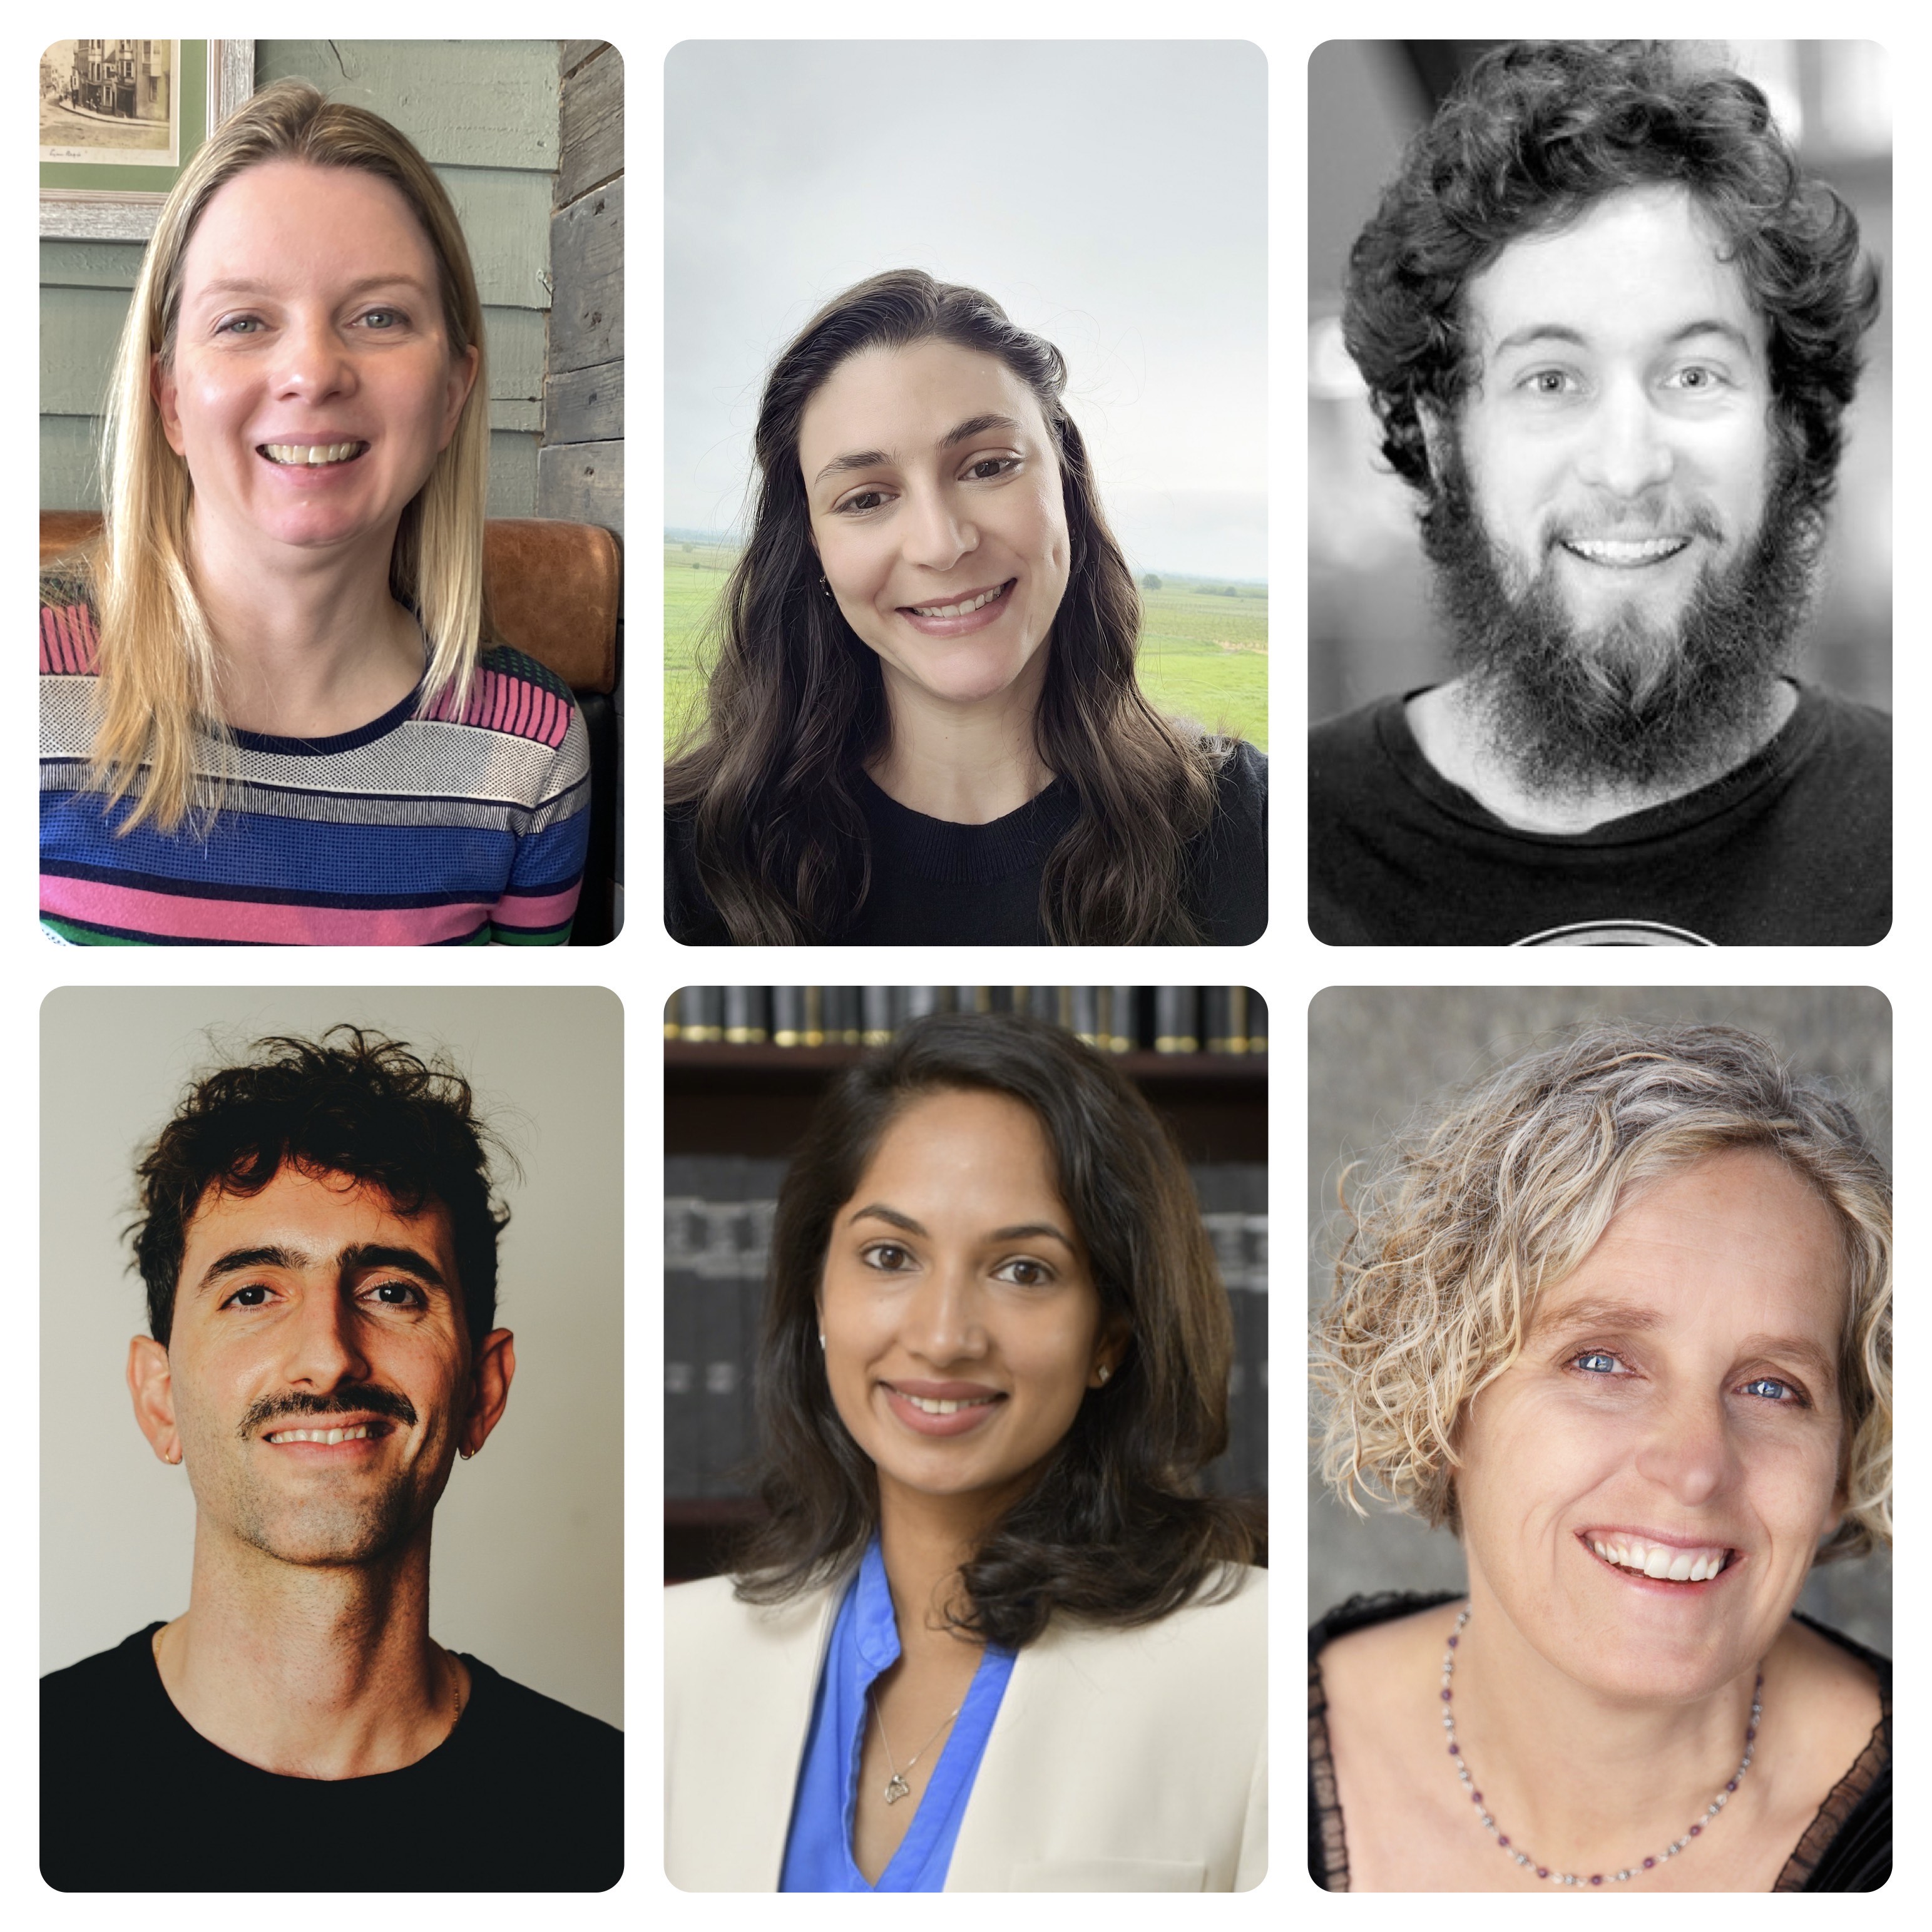 profile shots of the six academics named and welcomed in the text of the news piece